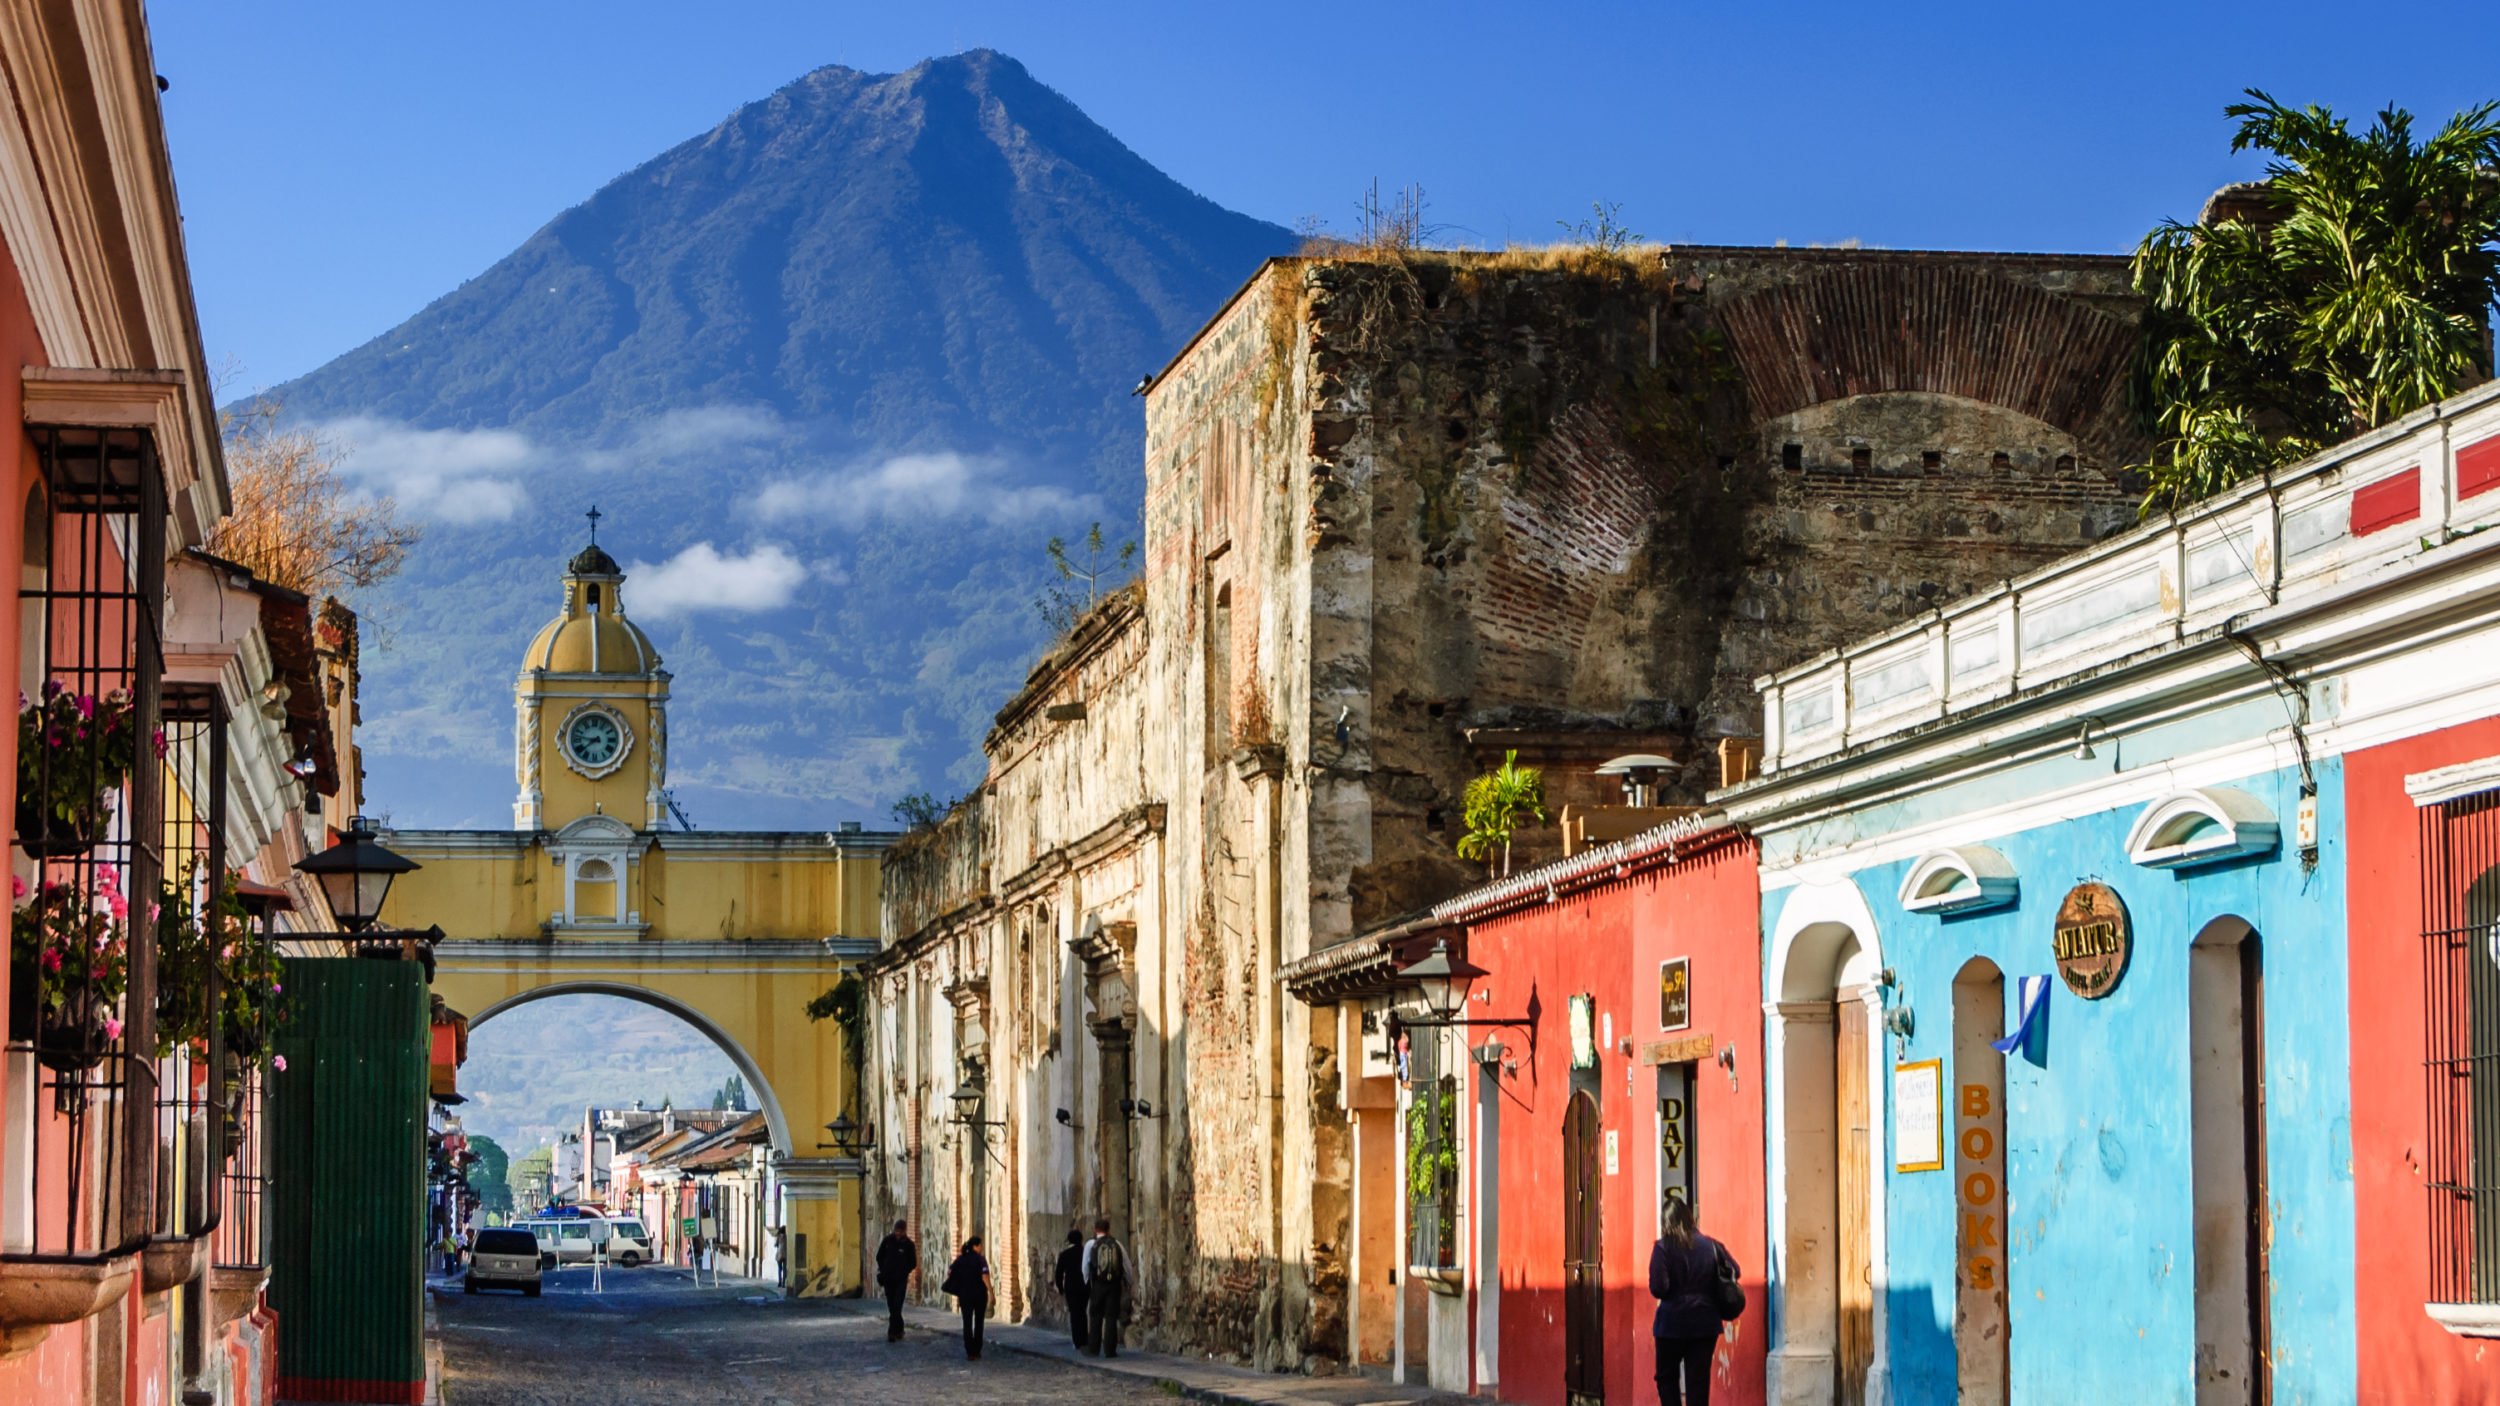 photo in Guatemala showing colonia city and mountain in the background